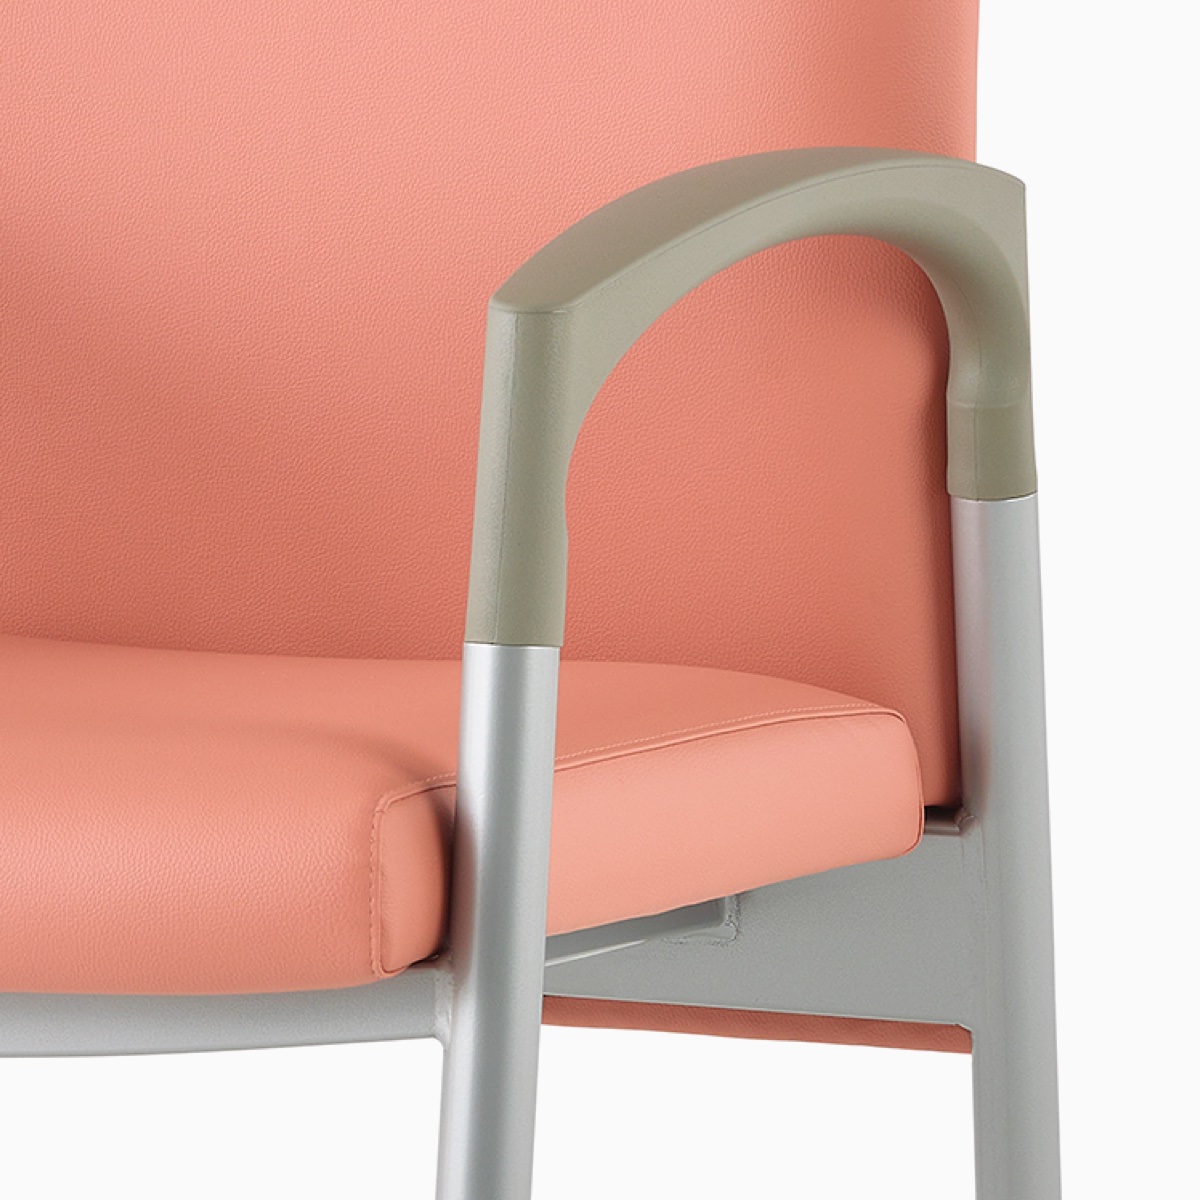 Detail of a silver frame and pewter armcap on a Valor Patient Chair upholstered in salmon pink.